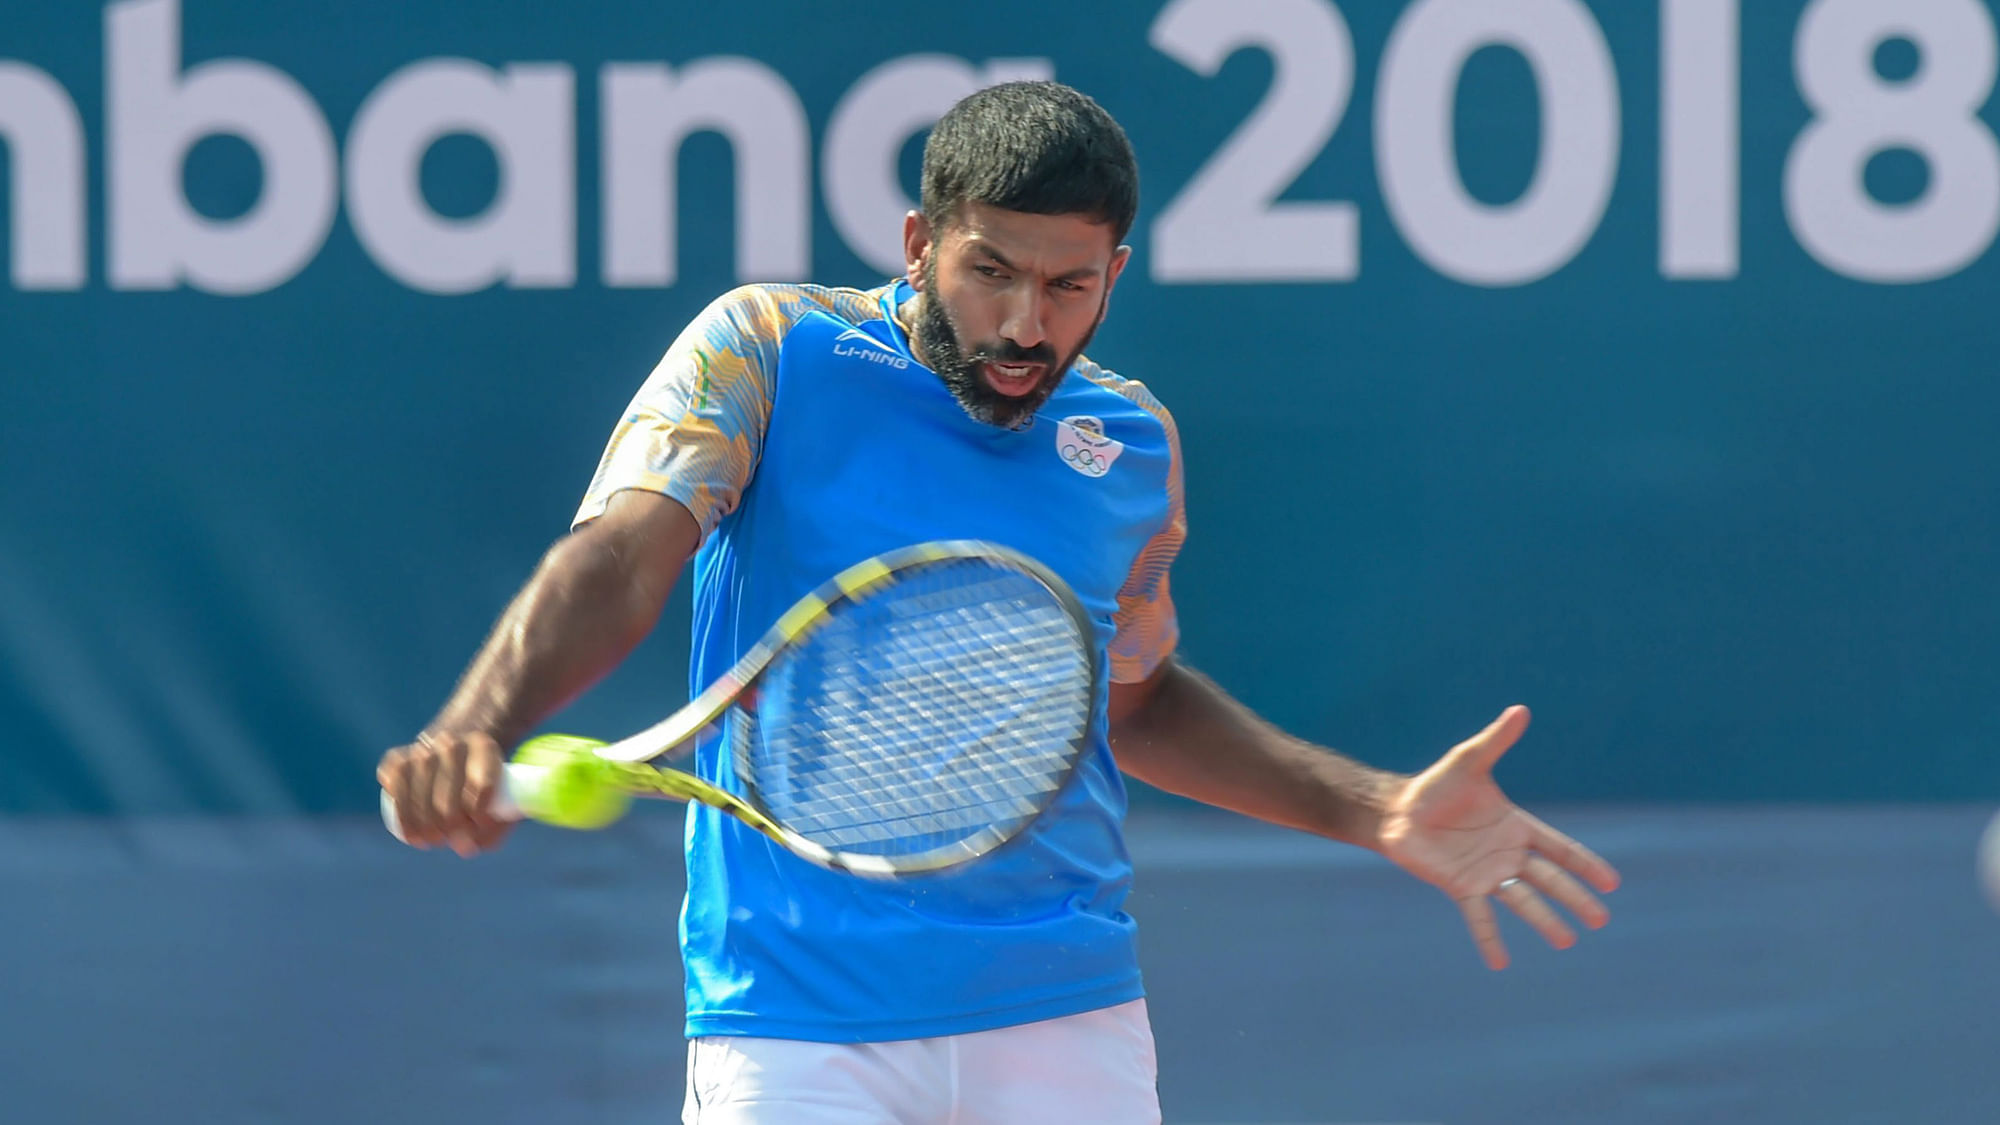 Rohan Bopanna in action. The Pakistan Tennis Federation ruled out shifting of the Davis Cup Asia/Oceania Group-1 tie against India.